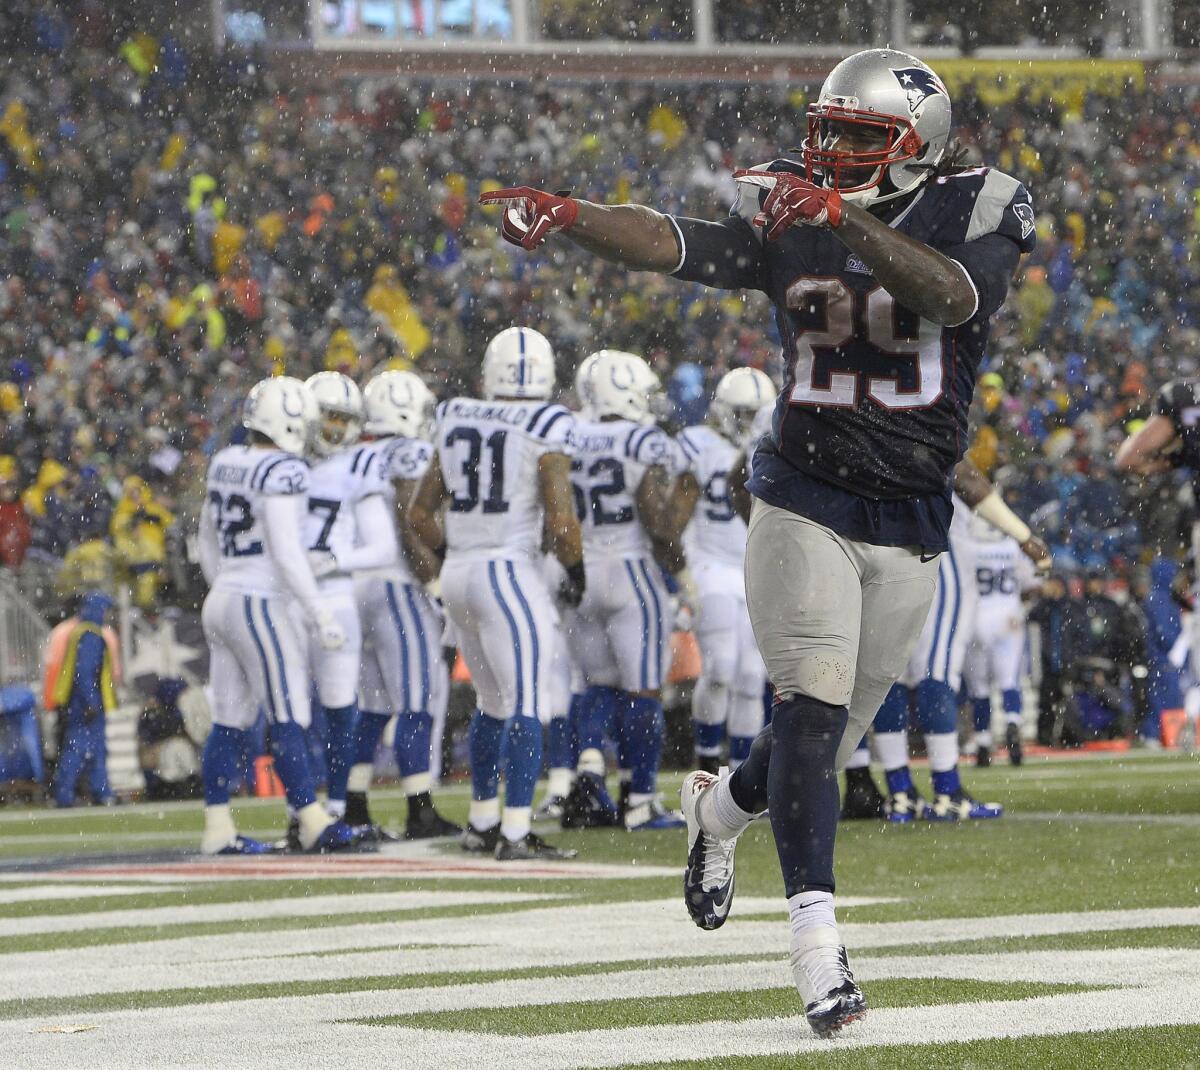 New England running back LeGarrette Blount celebrates one of his three touchdown carries against Indianapolis in the AFC Championship game Jan. 11 after being cut by Pittsburgh in November.